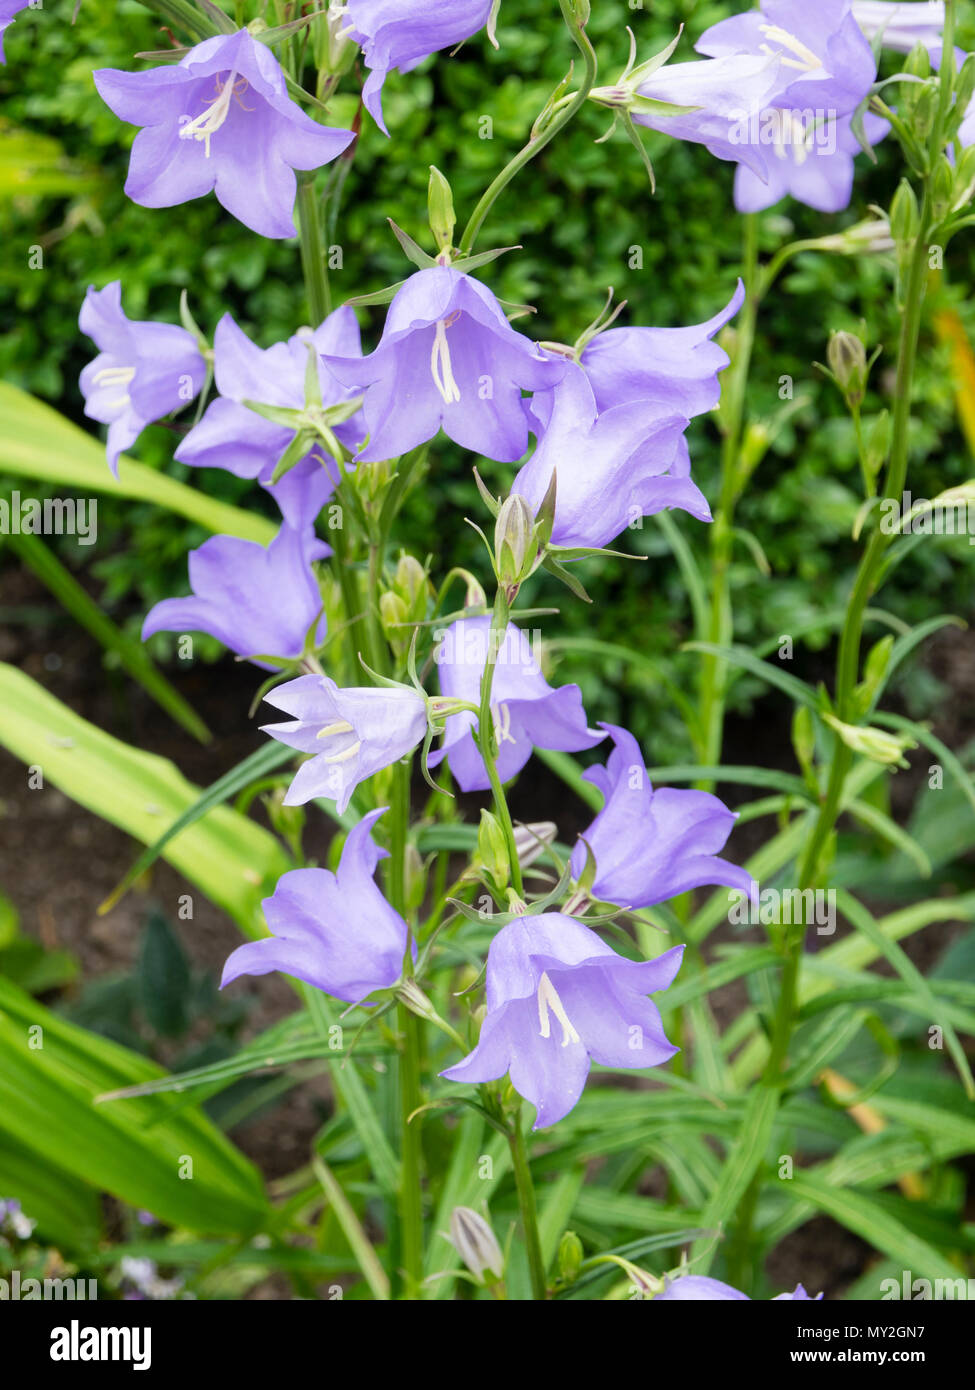 Blue flowers of the peach leaved bellflower, Campanula percisifolia, an early summer flowering cottage garden perennial Stock Photo